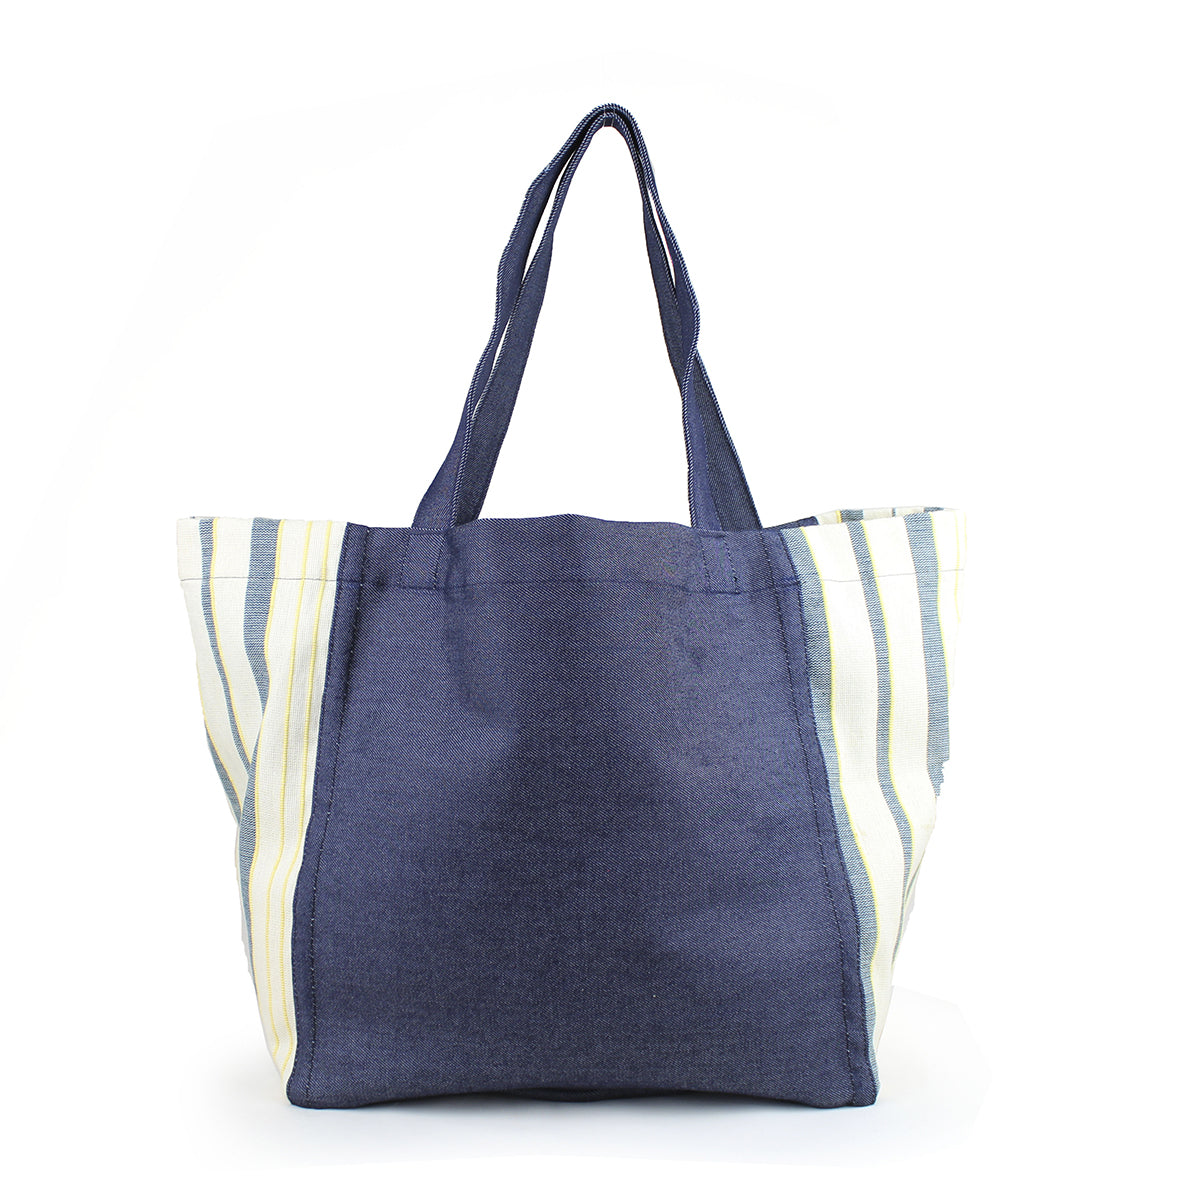 Blanca Handwoven Tote in Denim Ocean pattern. The tote has a dark wash denim. The sides have a light blue, yellow, and white vertical striped fabric.